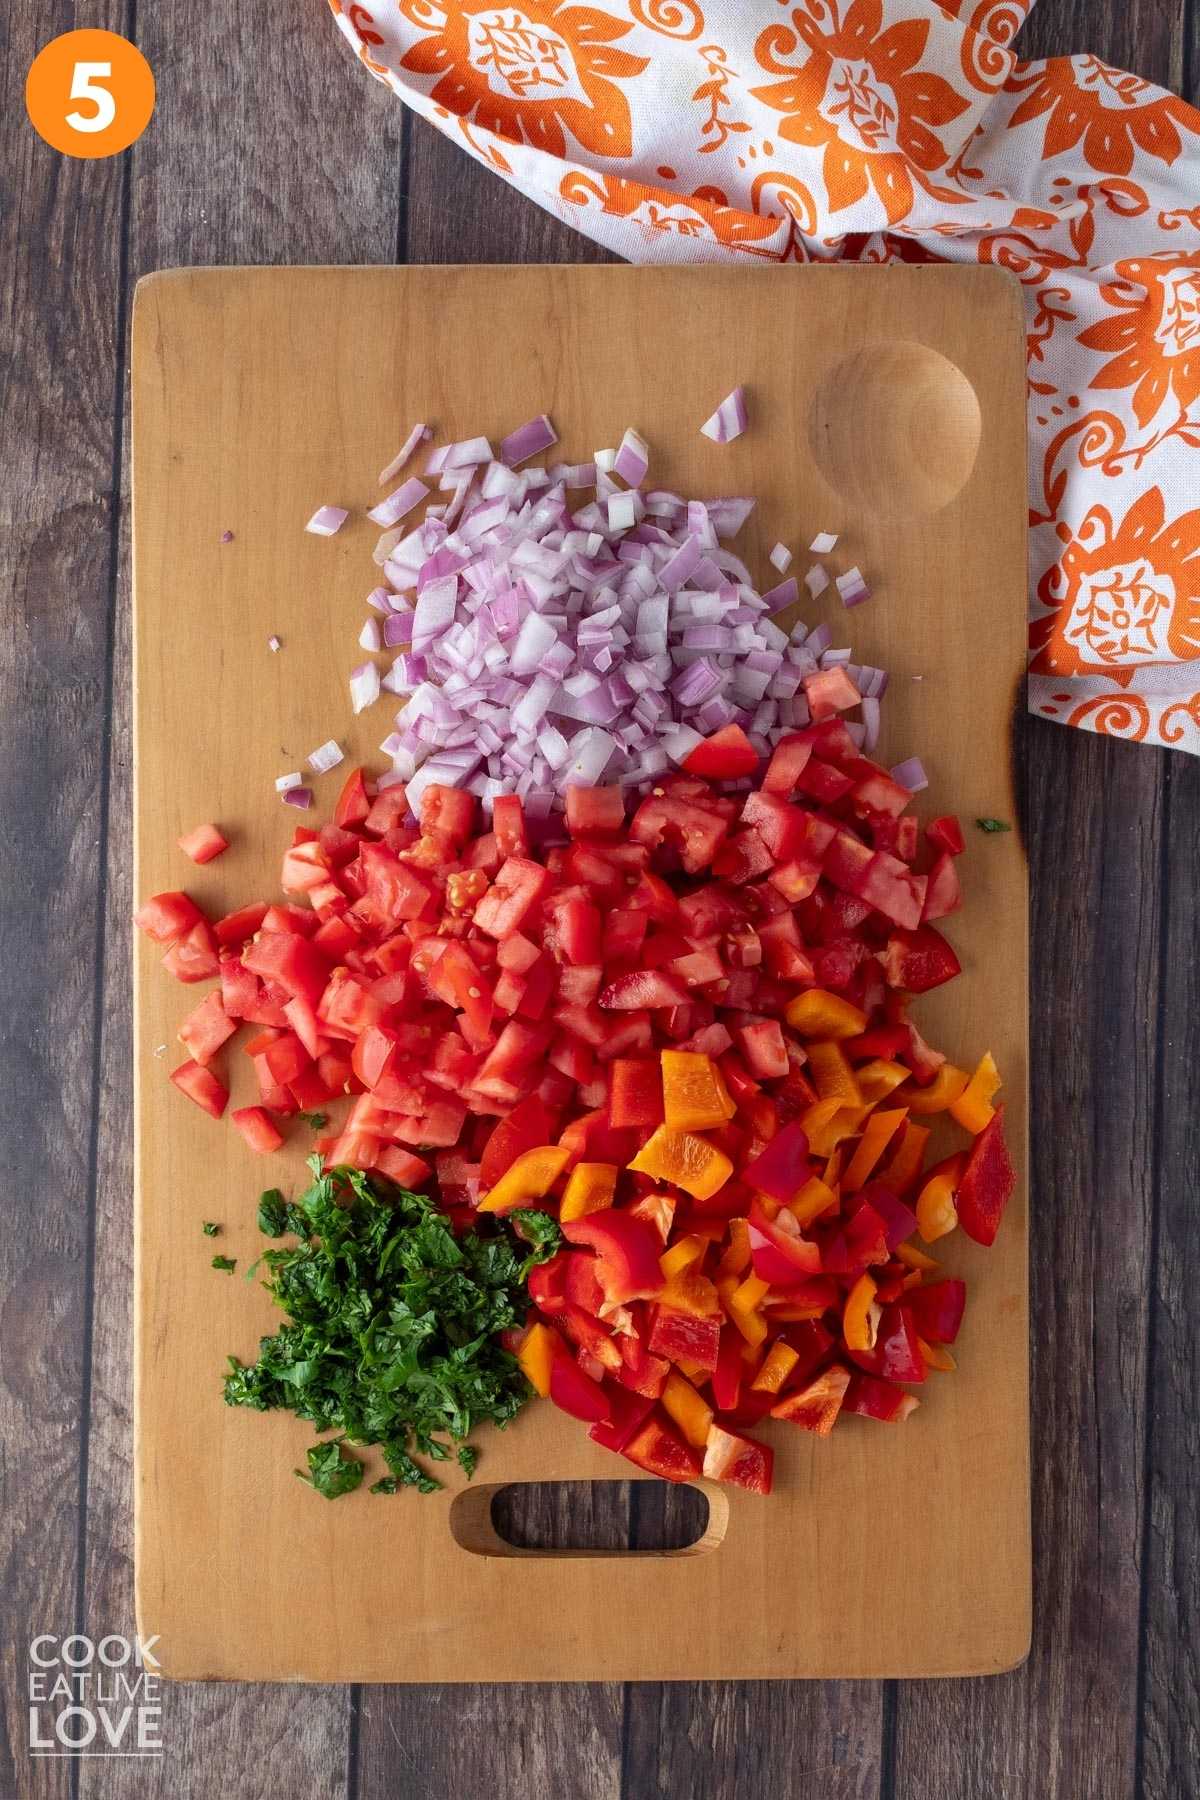 Vegetables all chopped on a cutting board.